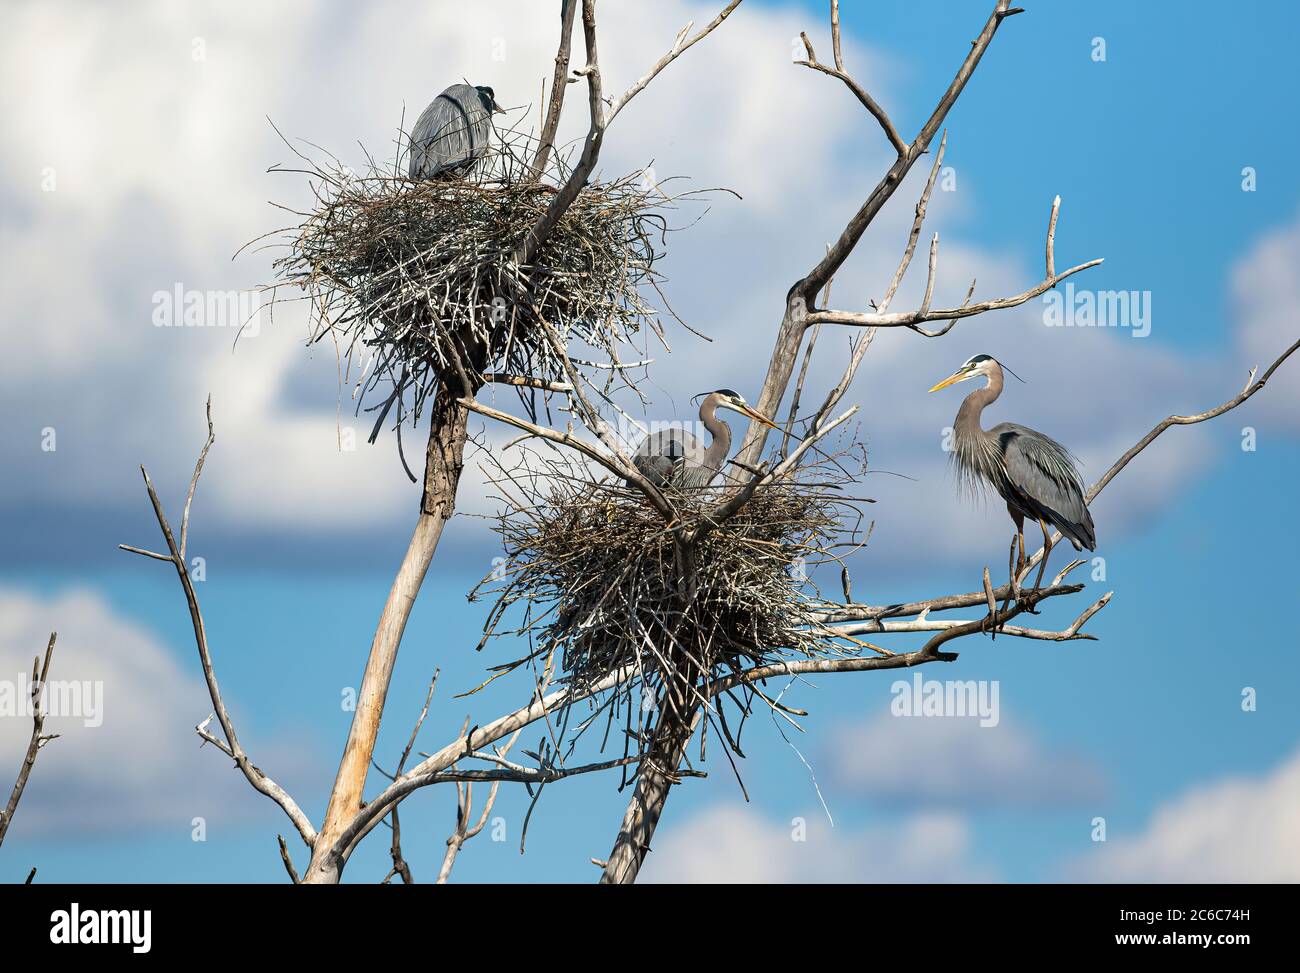 Great Blue Herons nesting in a tall deadwood tree against a beautiful backdrop of fluffy white clouds and baby blue sky on a scenic Colorado day. Stock Photo